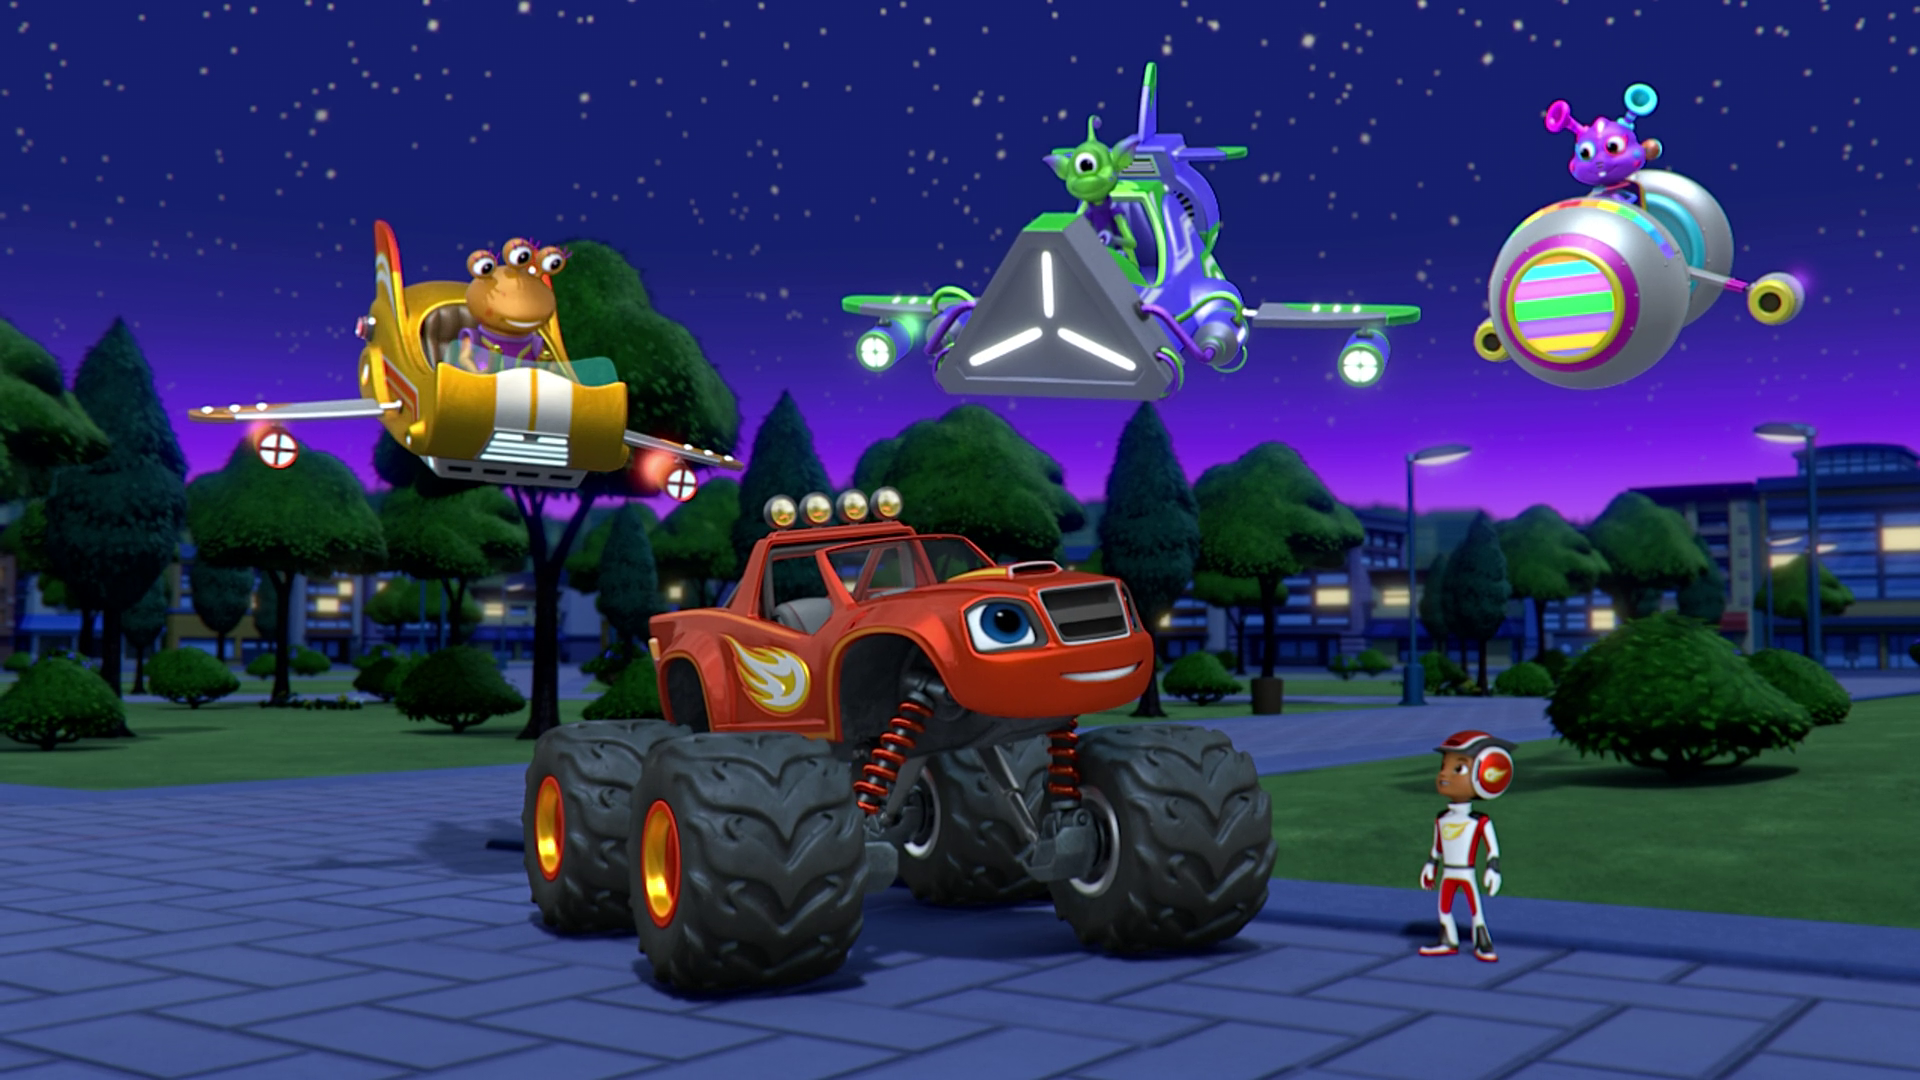 The Great Space Race/Gallery | Blaze and the Monster Machines Wiki | Fandom